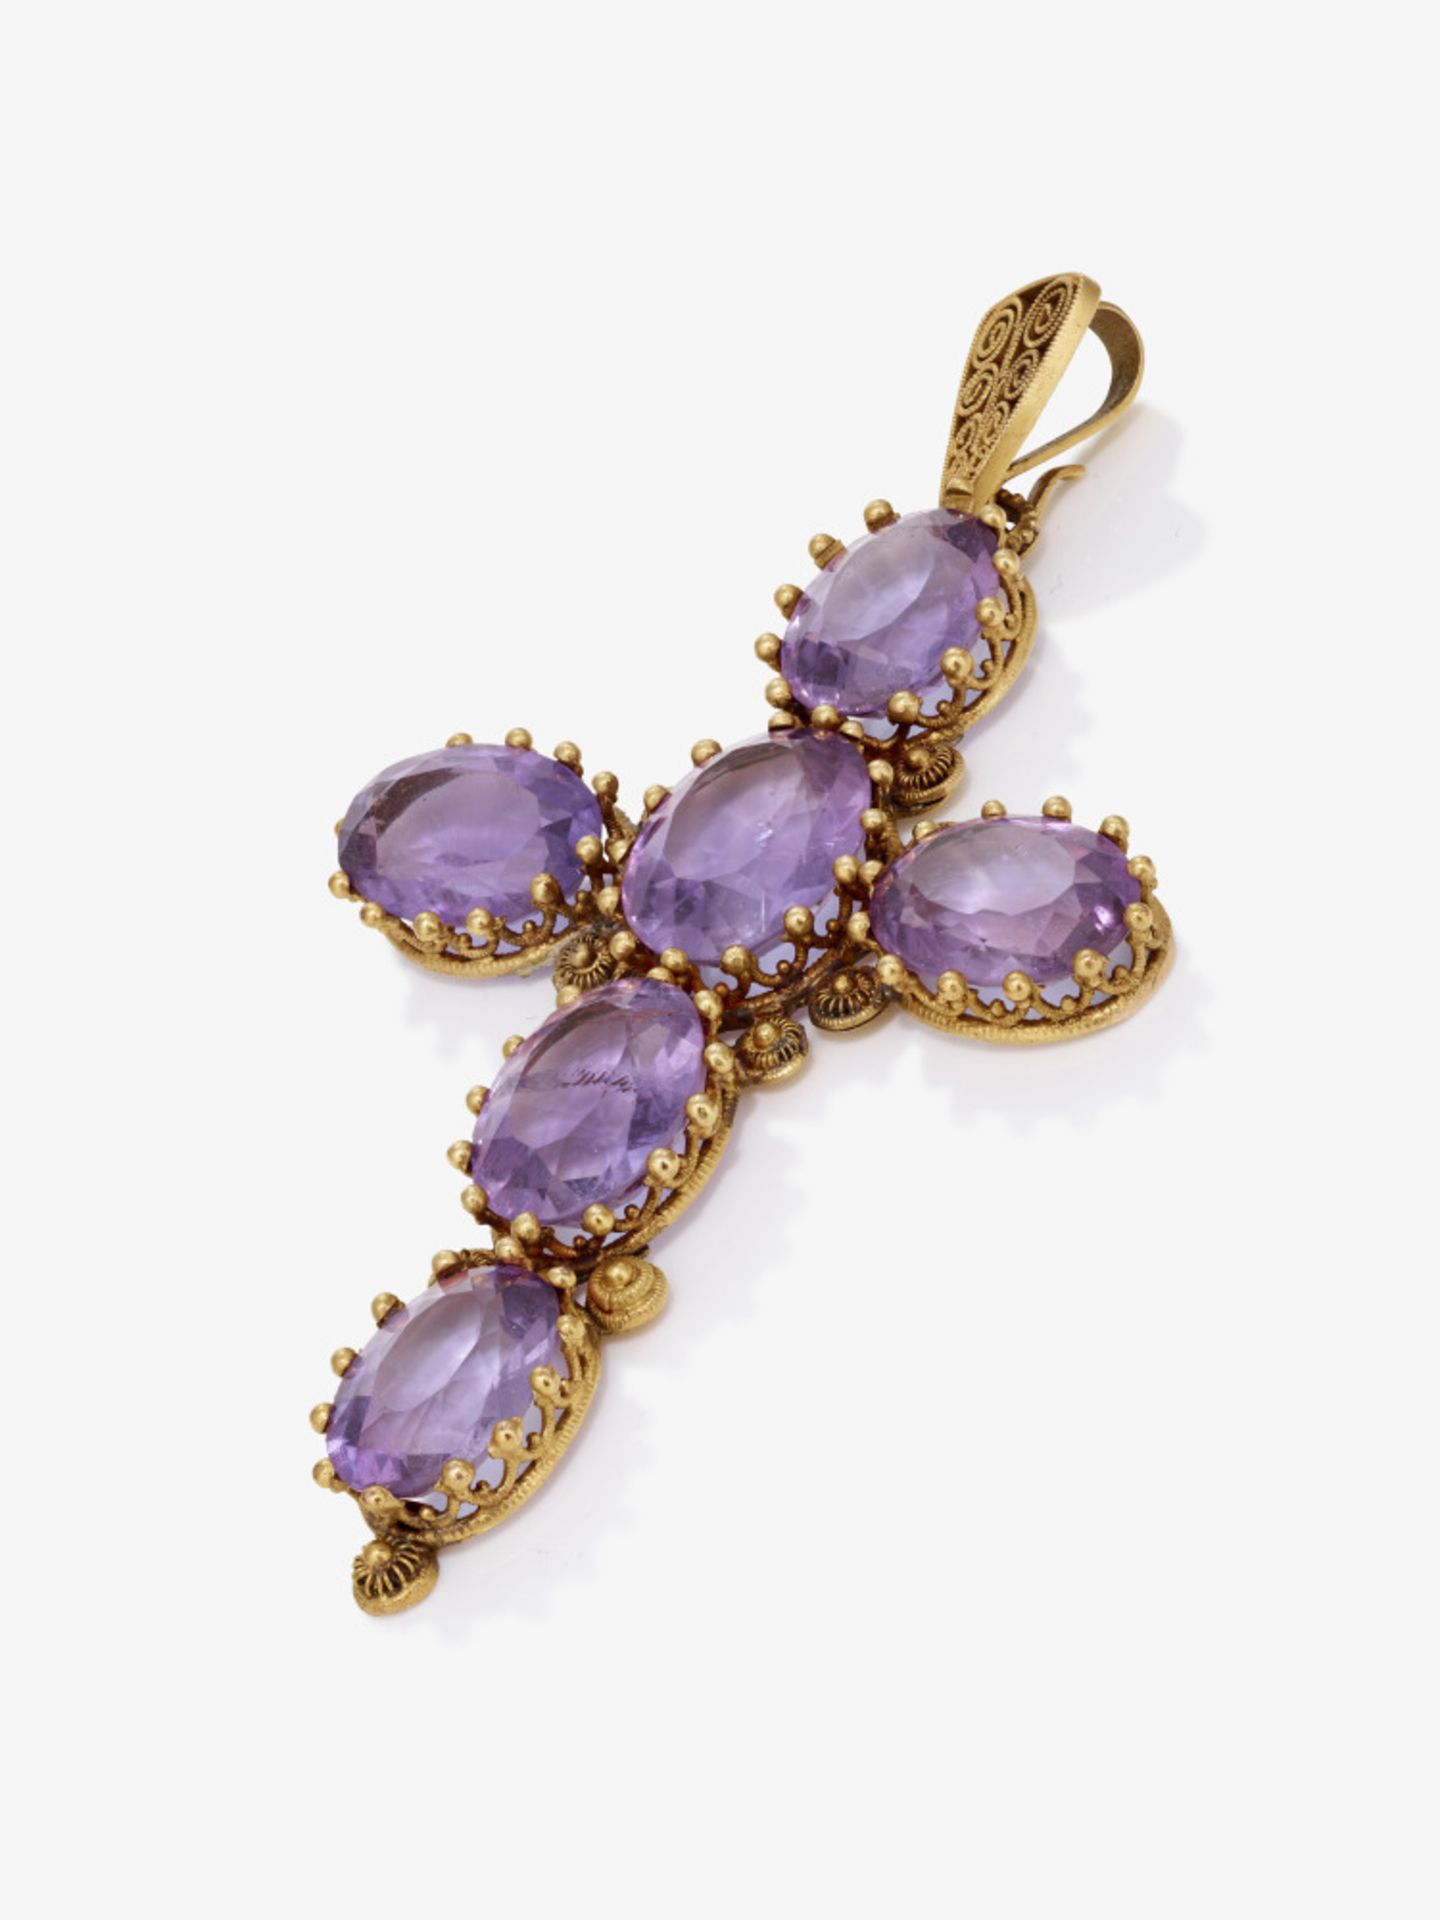 A cross pendant with amethysts - Probably Germany, circa 1870-1880 - Image 2 of 2